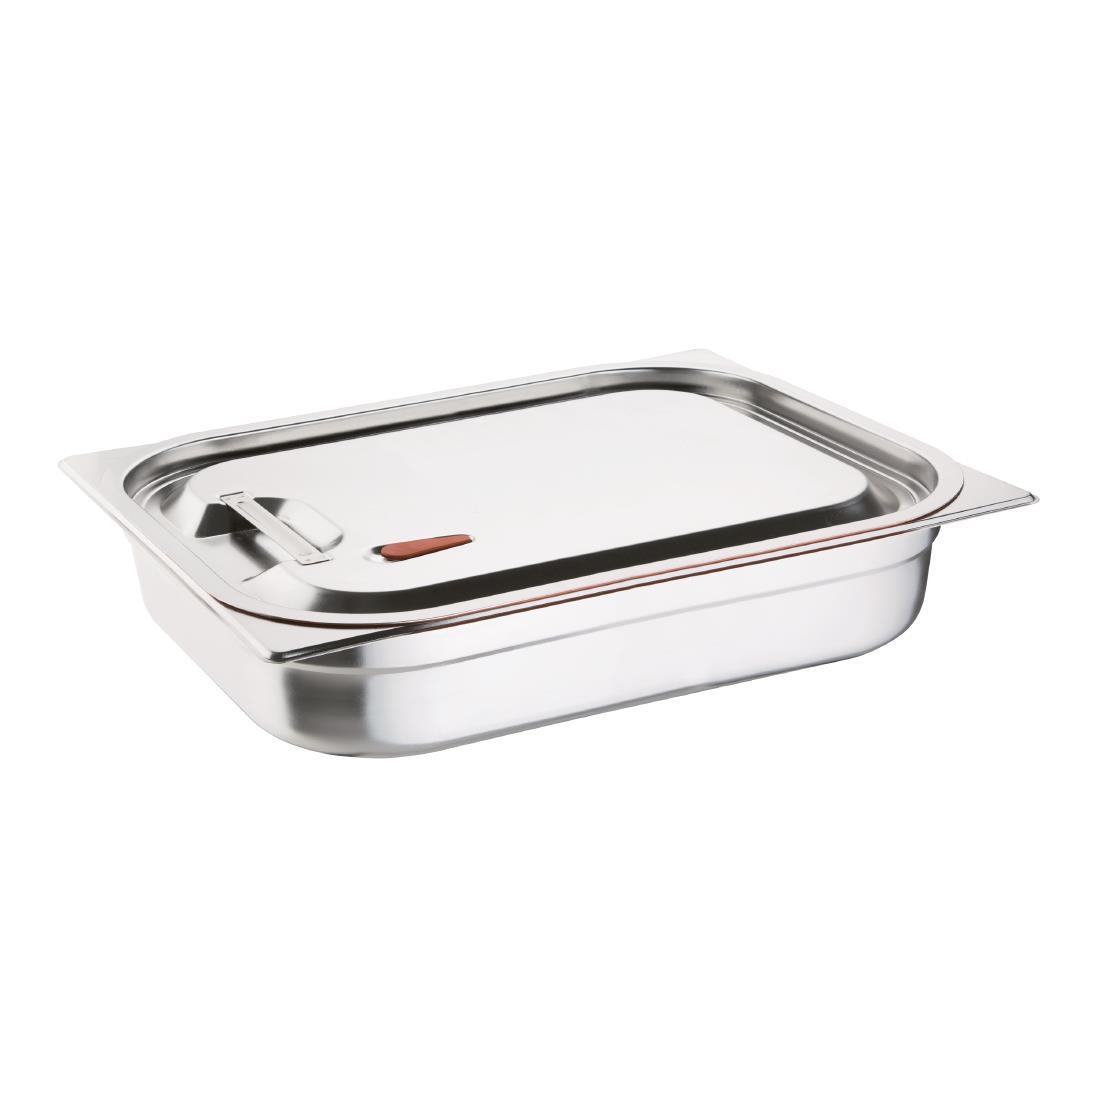 Vogue Stainless Steel and Silicone Sealable 1/1 Gastronorm Lid - CP268  - 2